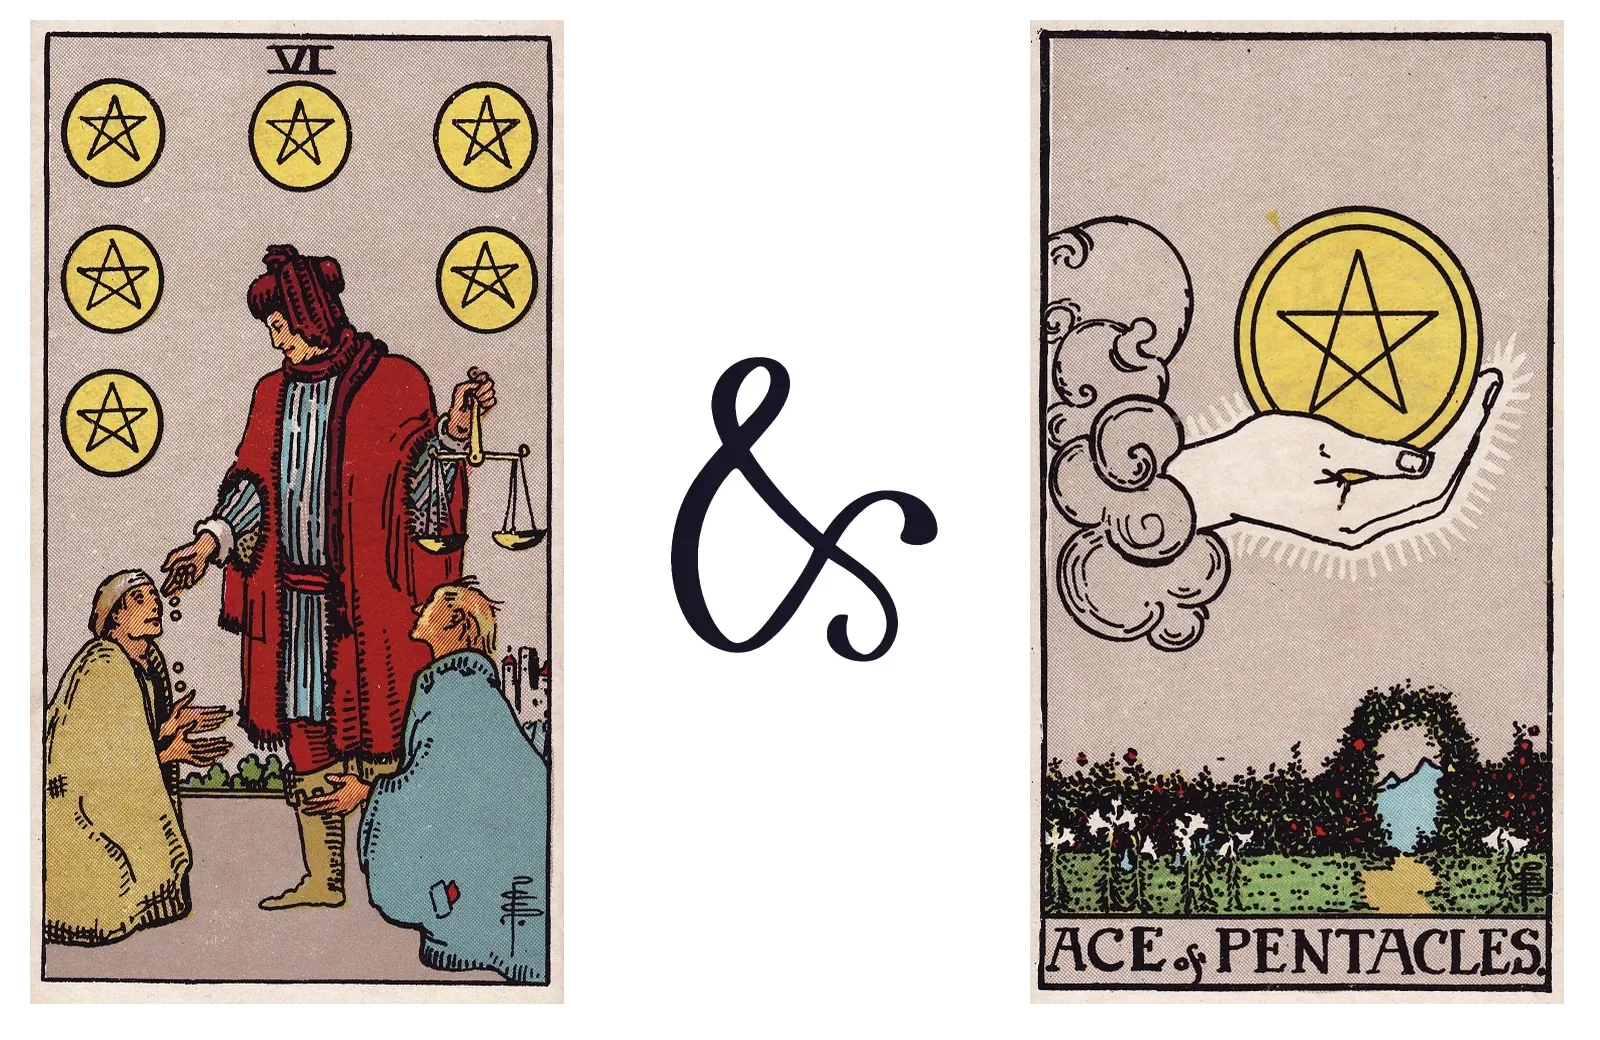 Six of Pentacles and Ace of Pentacles